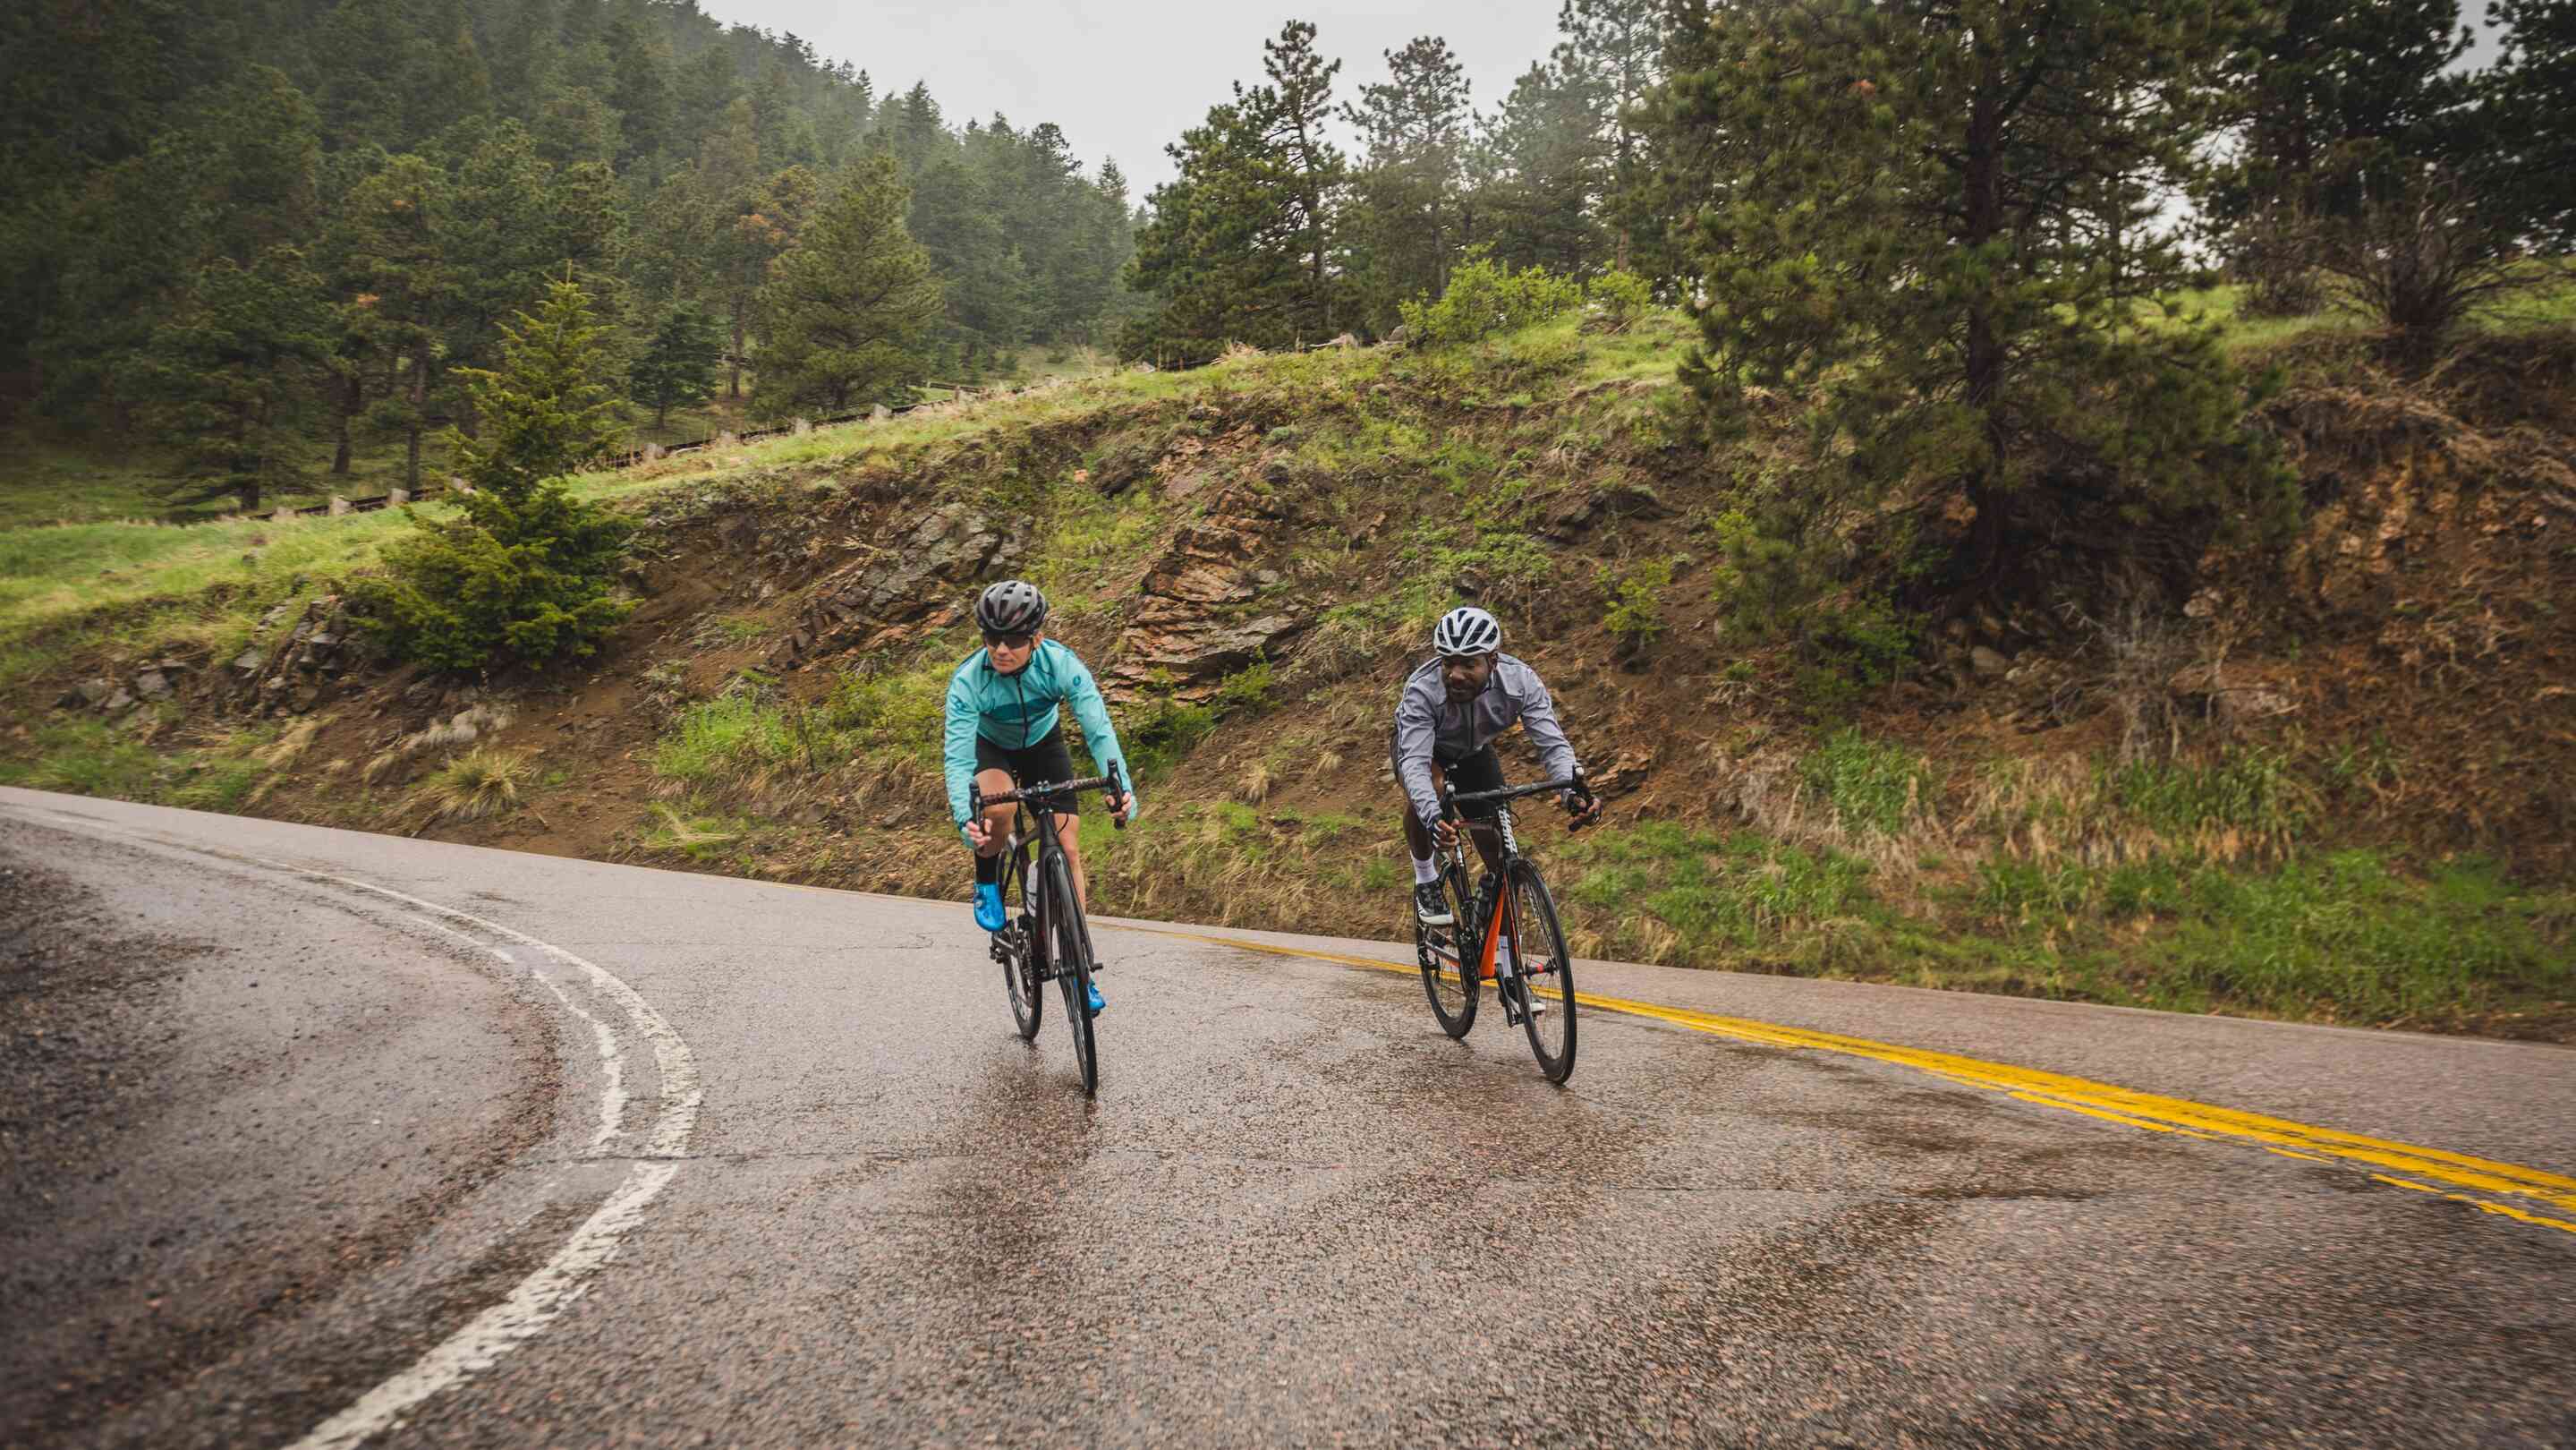 8 Tips for Riding in Wet Conditions